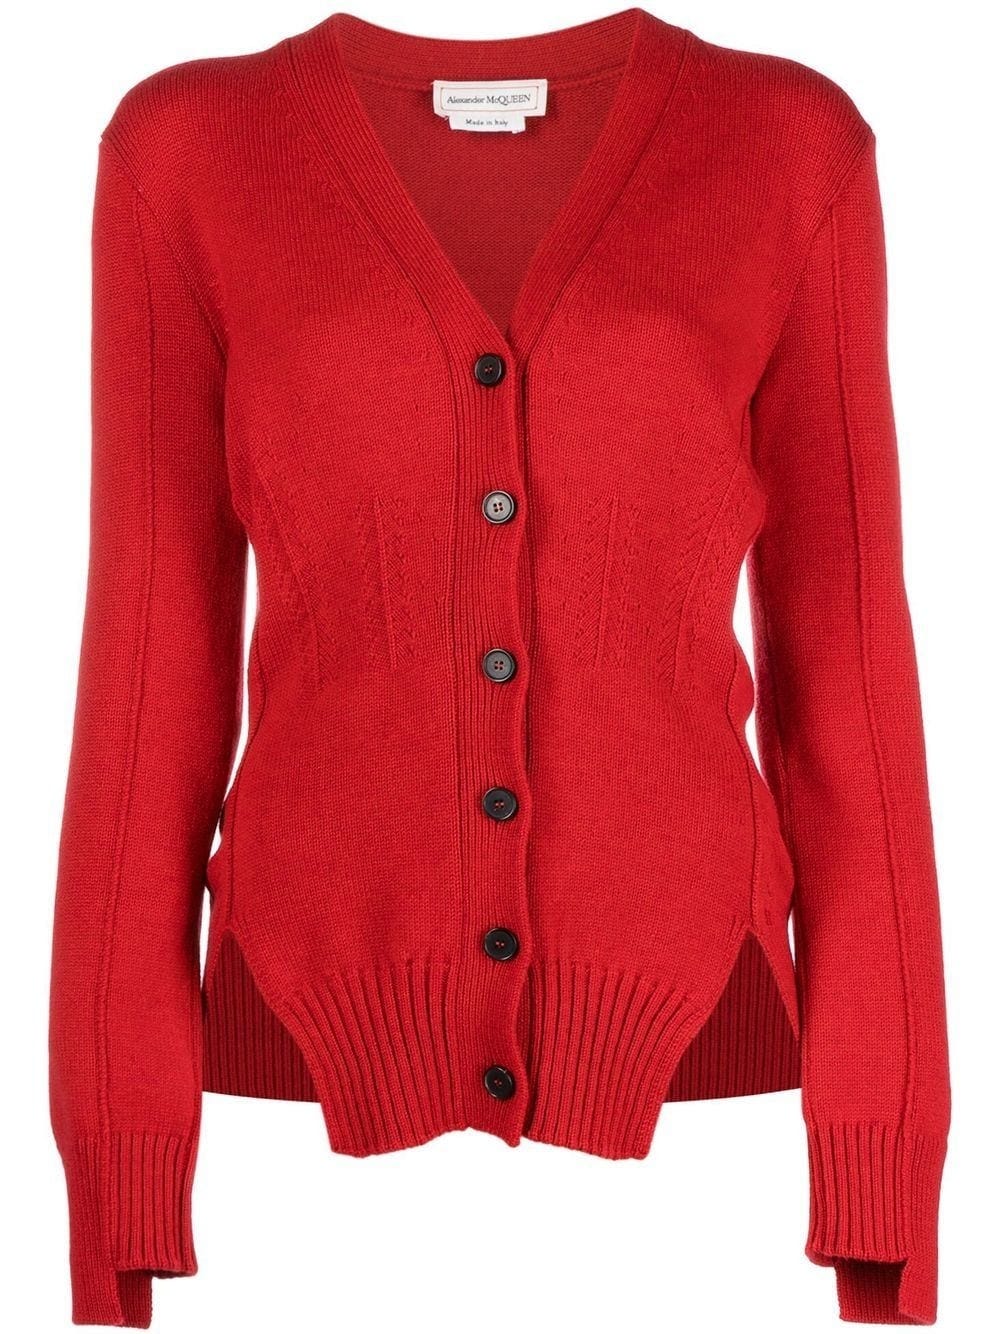 ALEXANDER MCQUEEN RED KNITTED CARDIGAN WITH V-NECK AND BUTTONS